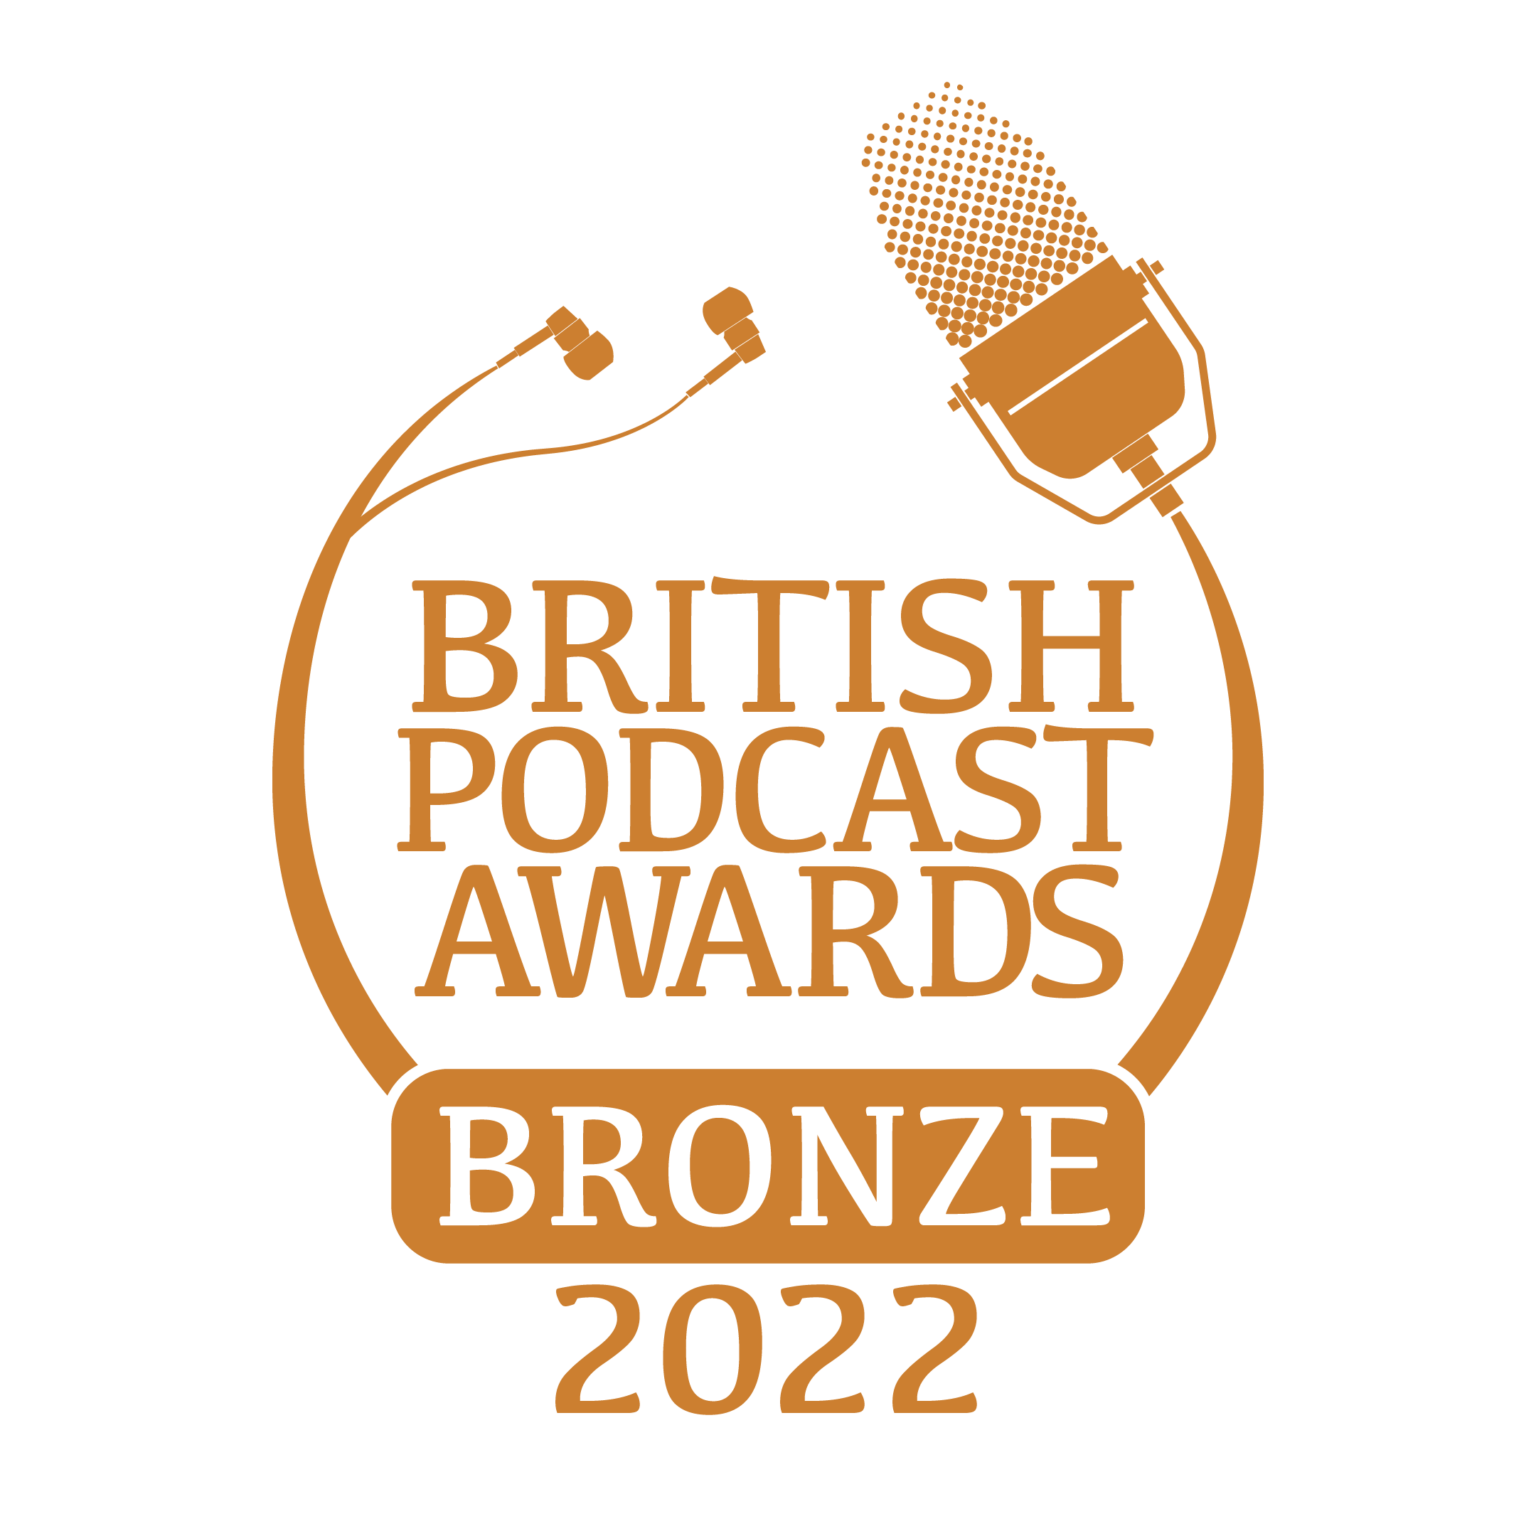 British Podcast Awards 2022 We're winners! made by mortals